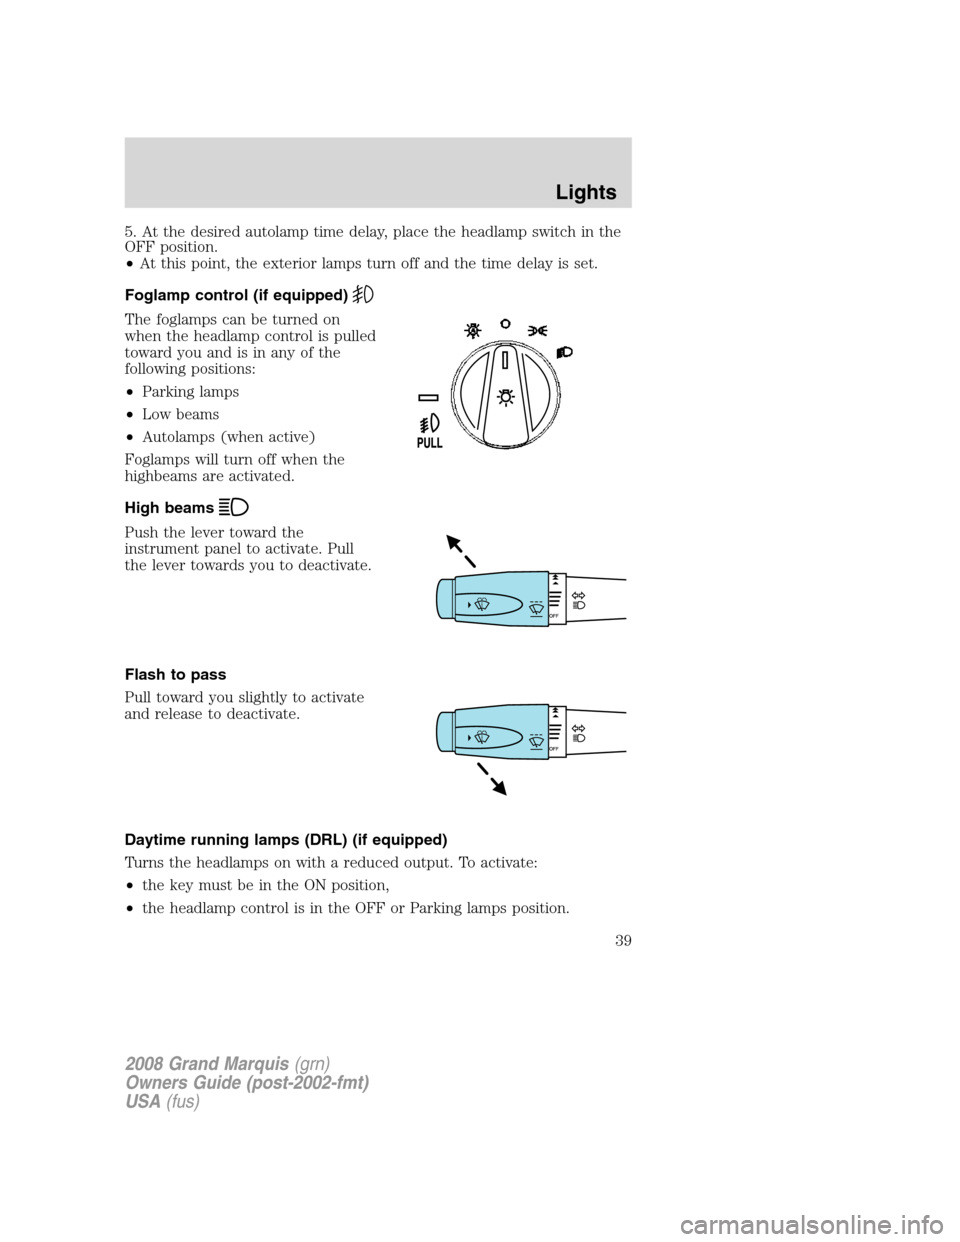 Mercury Grand Marquis 2008  Owners Manuals 5. At the desired autolamp time delay, place the headlamp switch in the
OFF position.
•At this point, the exterior lamps turn off and the time delay is set.
Foglamp control (if equipped)
The foglamp